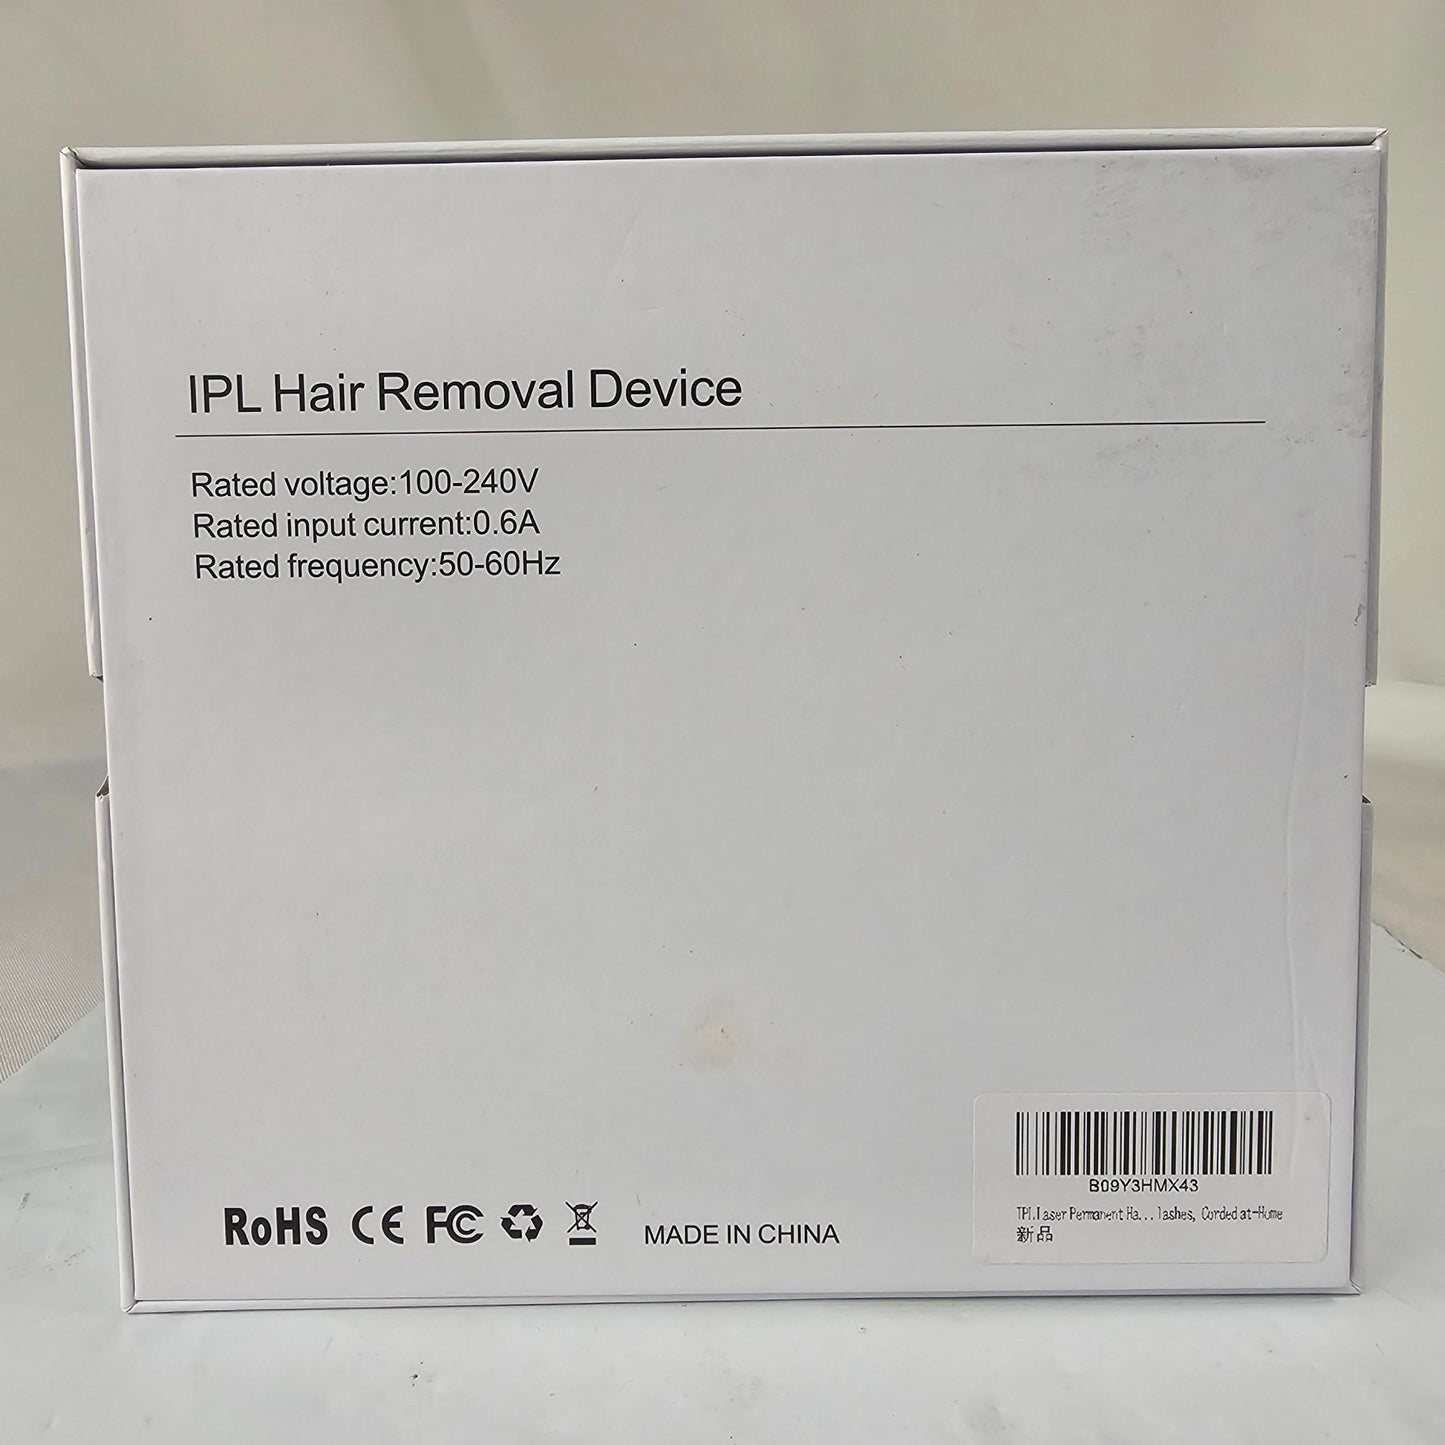 IPL Hair Removal Device | 5 Stage Strength | Permanent Hair Reduction | Safe & Easy - DQ Distribution